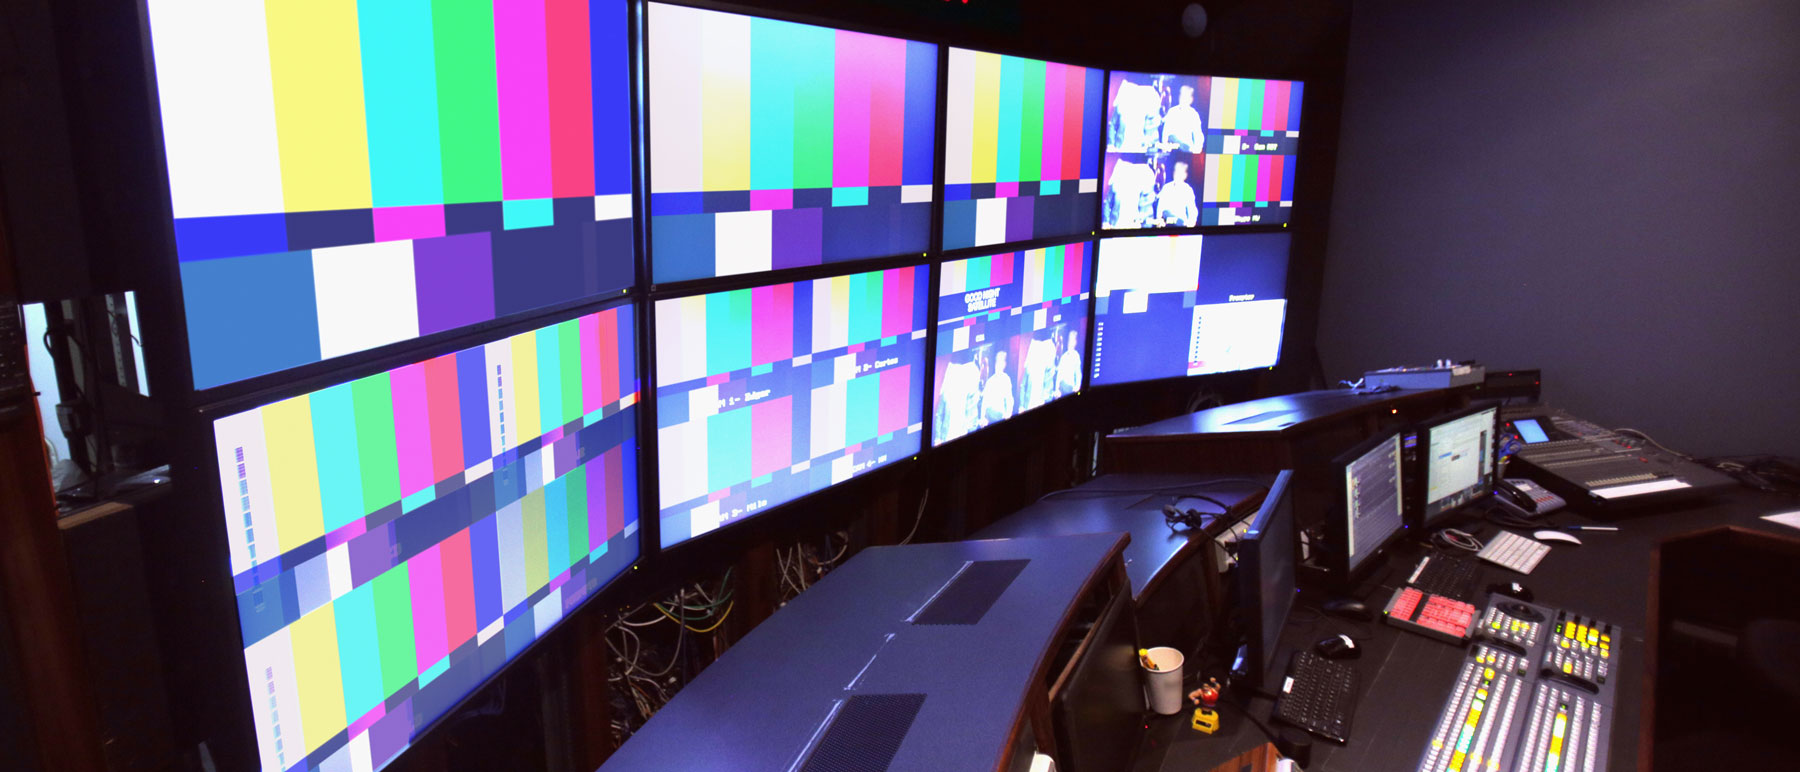 television production room with multiple t.v. screens and equipment